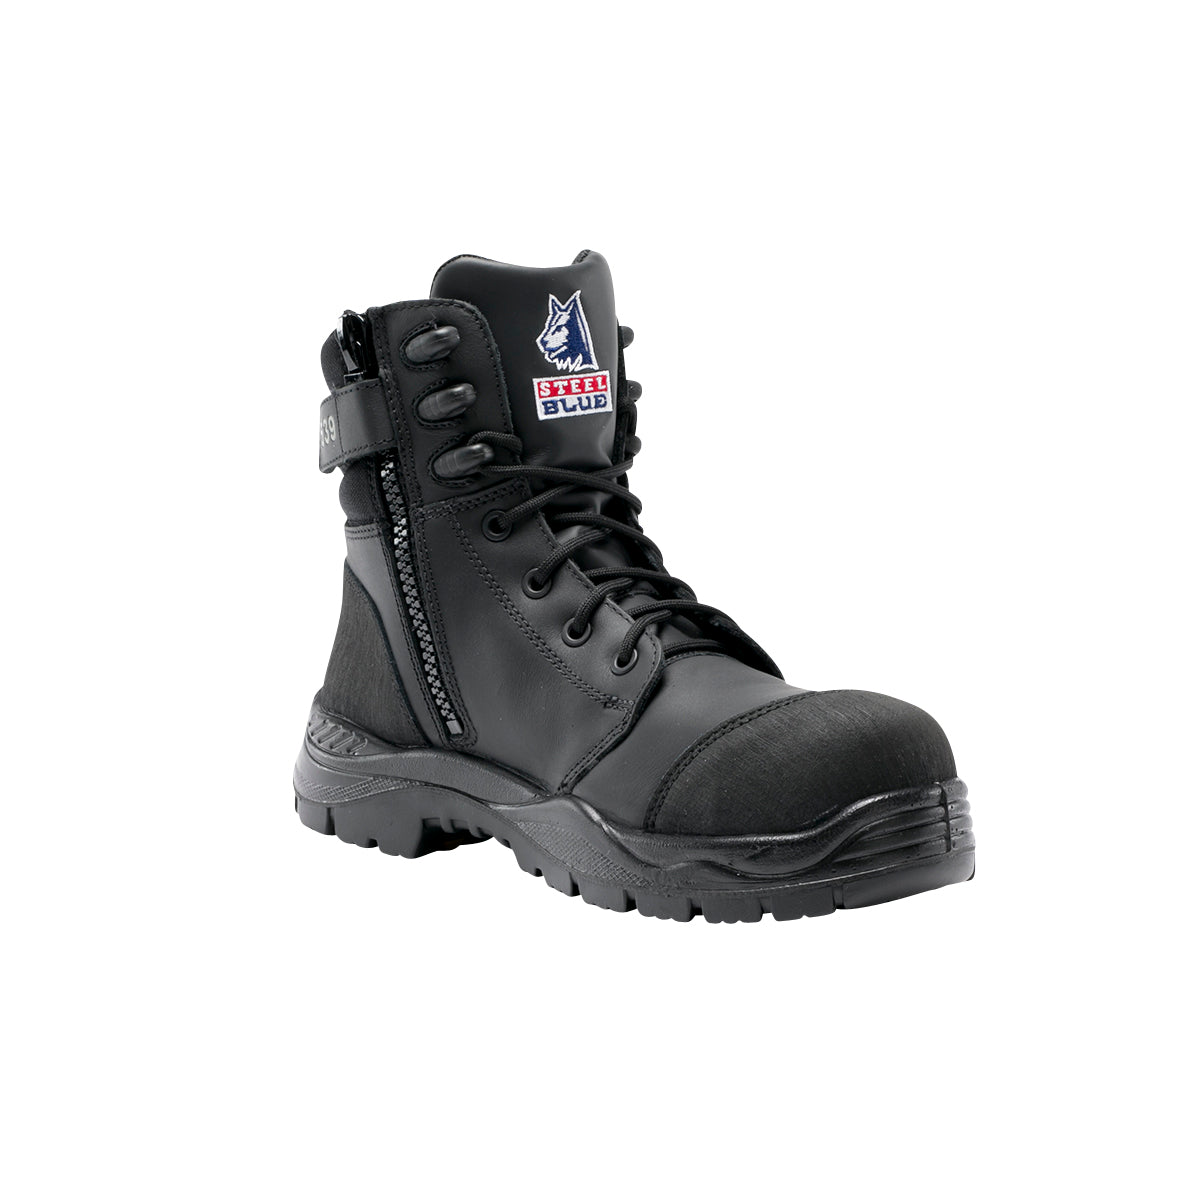 STEEL BLUE 627539 TORQUAY NITRILE OUTSOLE COMPOSITE TOE SAFETY BOOTS - ZIP SIDE